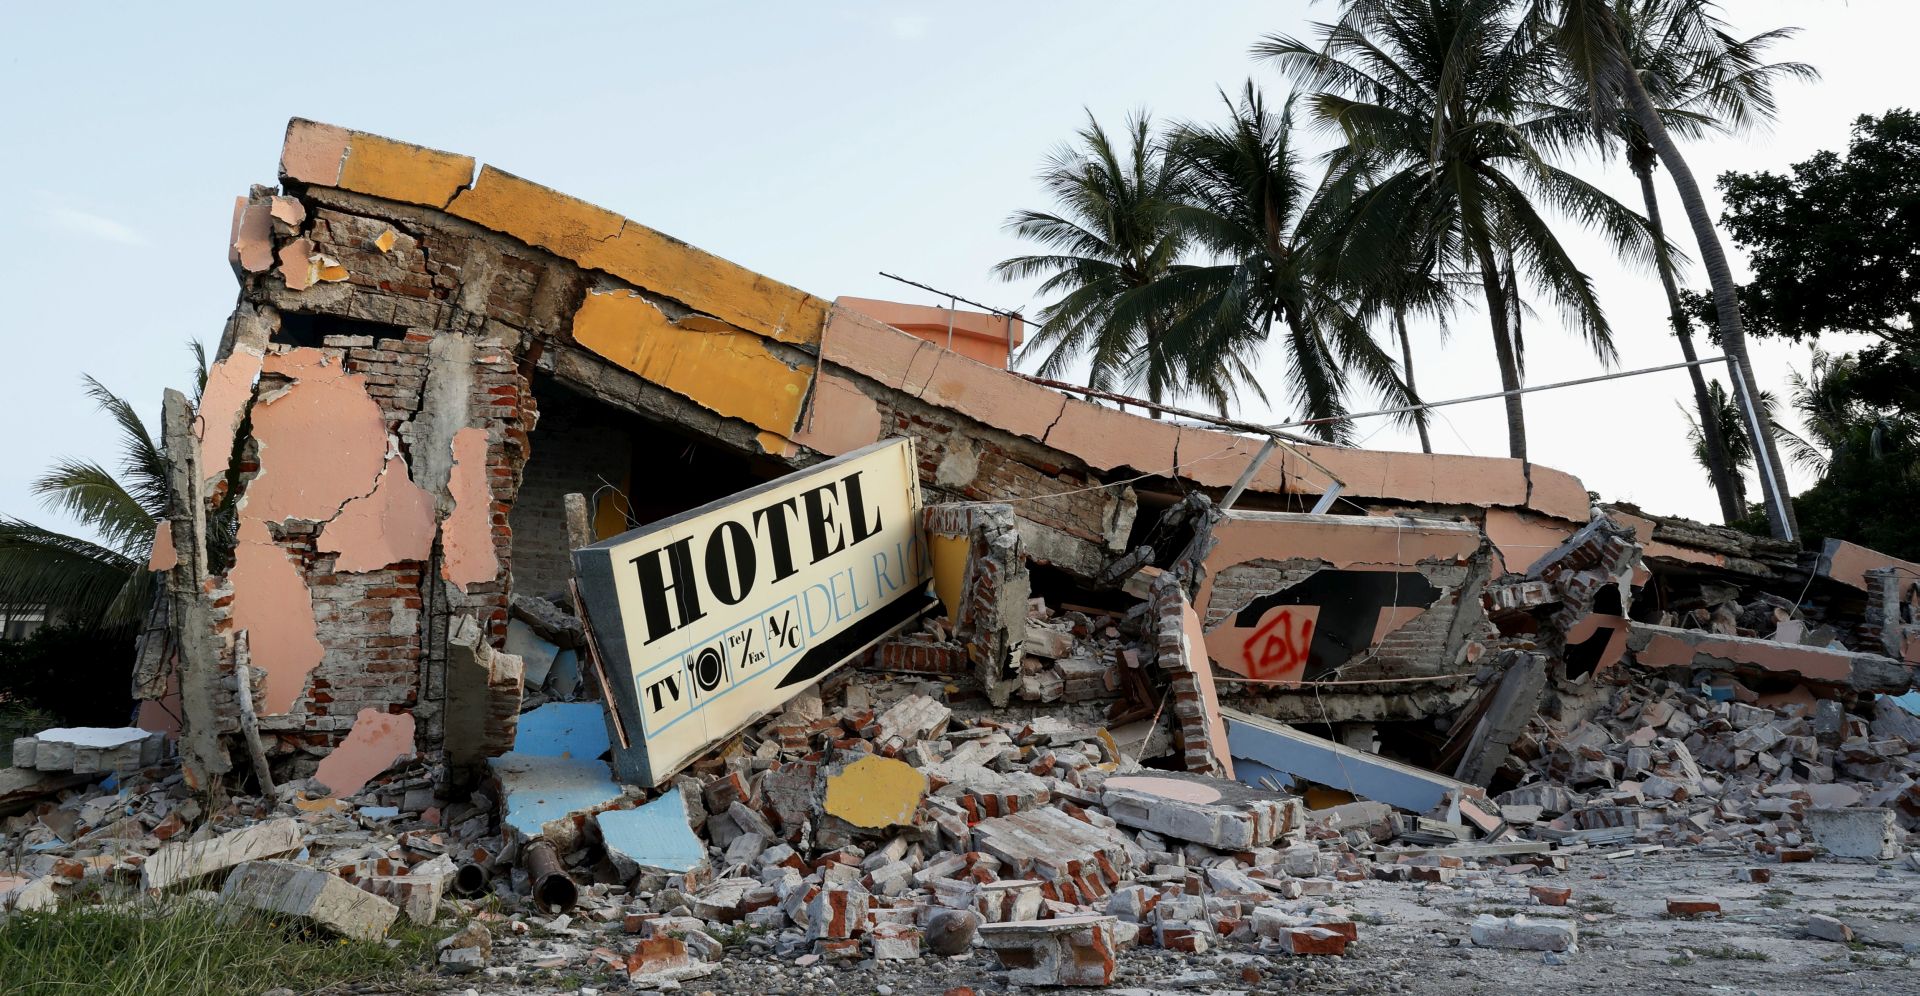 epa06194297 View of a hotel destroyed in the Juchitan municipality, in Oaxaca, Mexico, 9 September 2017. Juchitan is one of the most affected places by the 8.2-magnitude earthquake, the strongest in the country since 1932, that has left at least 61 dead and more than 250 injured.  EPA/Jorge Nunez